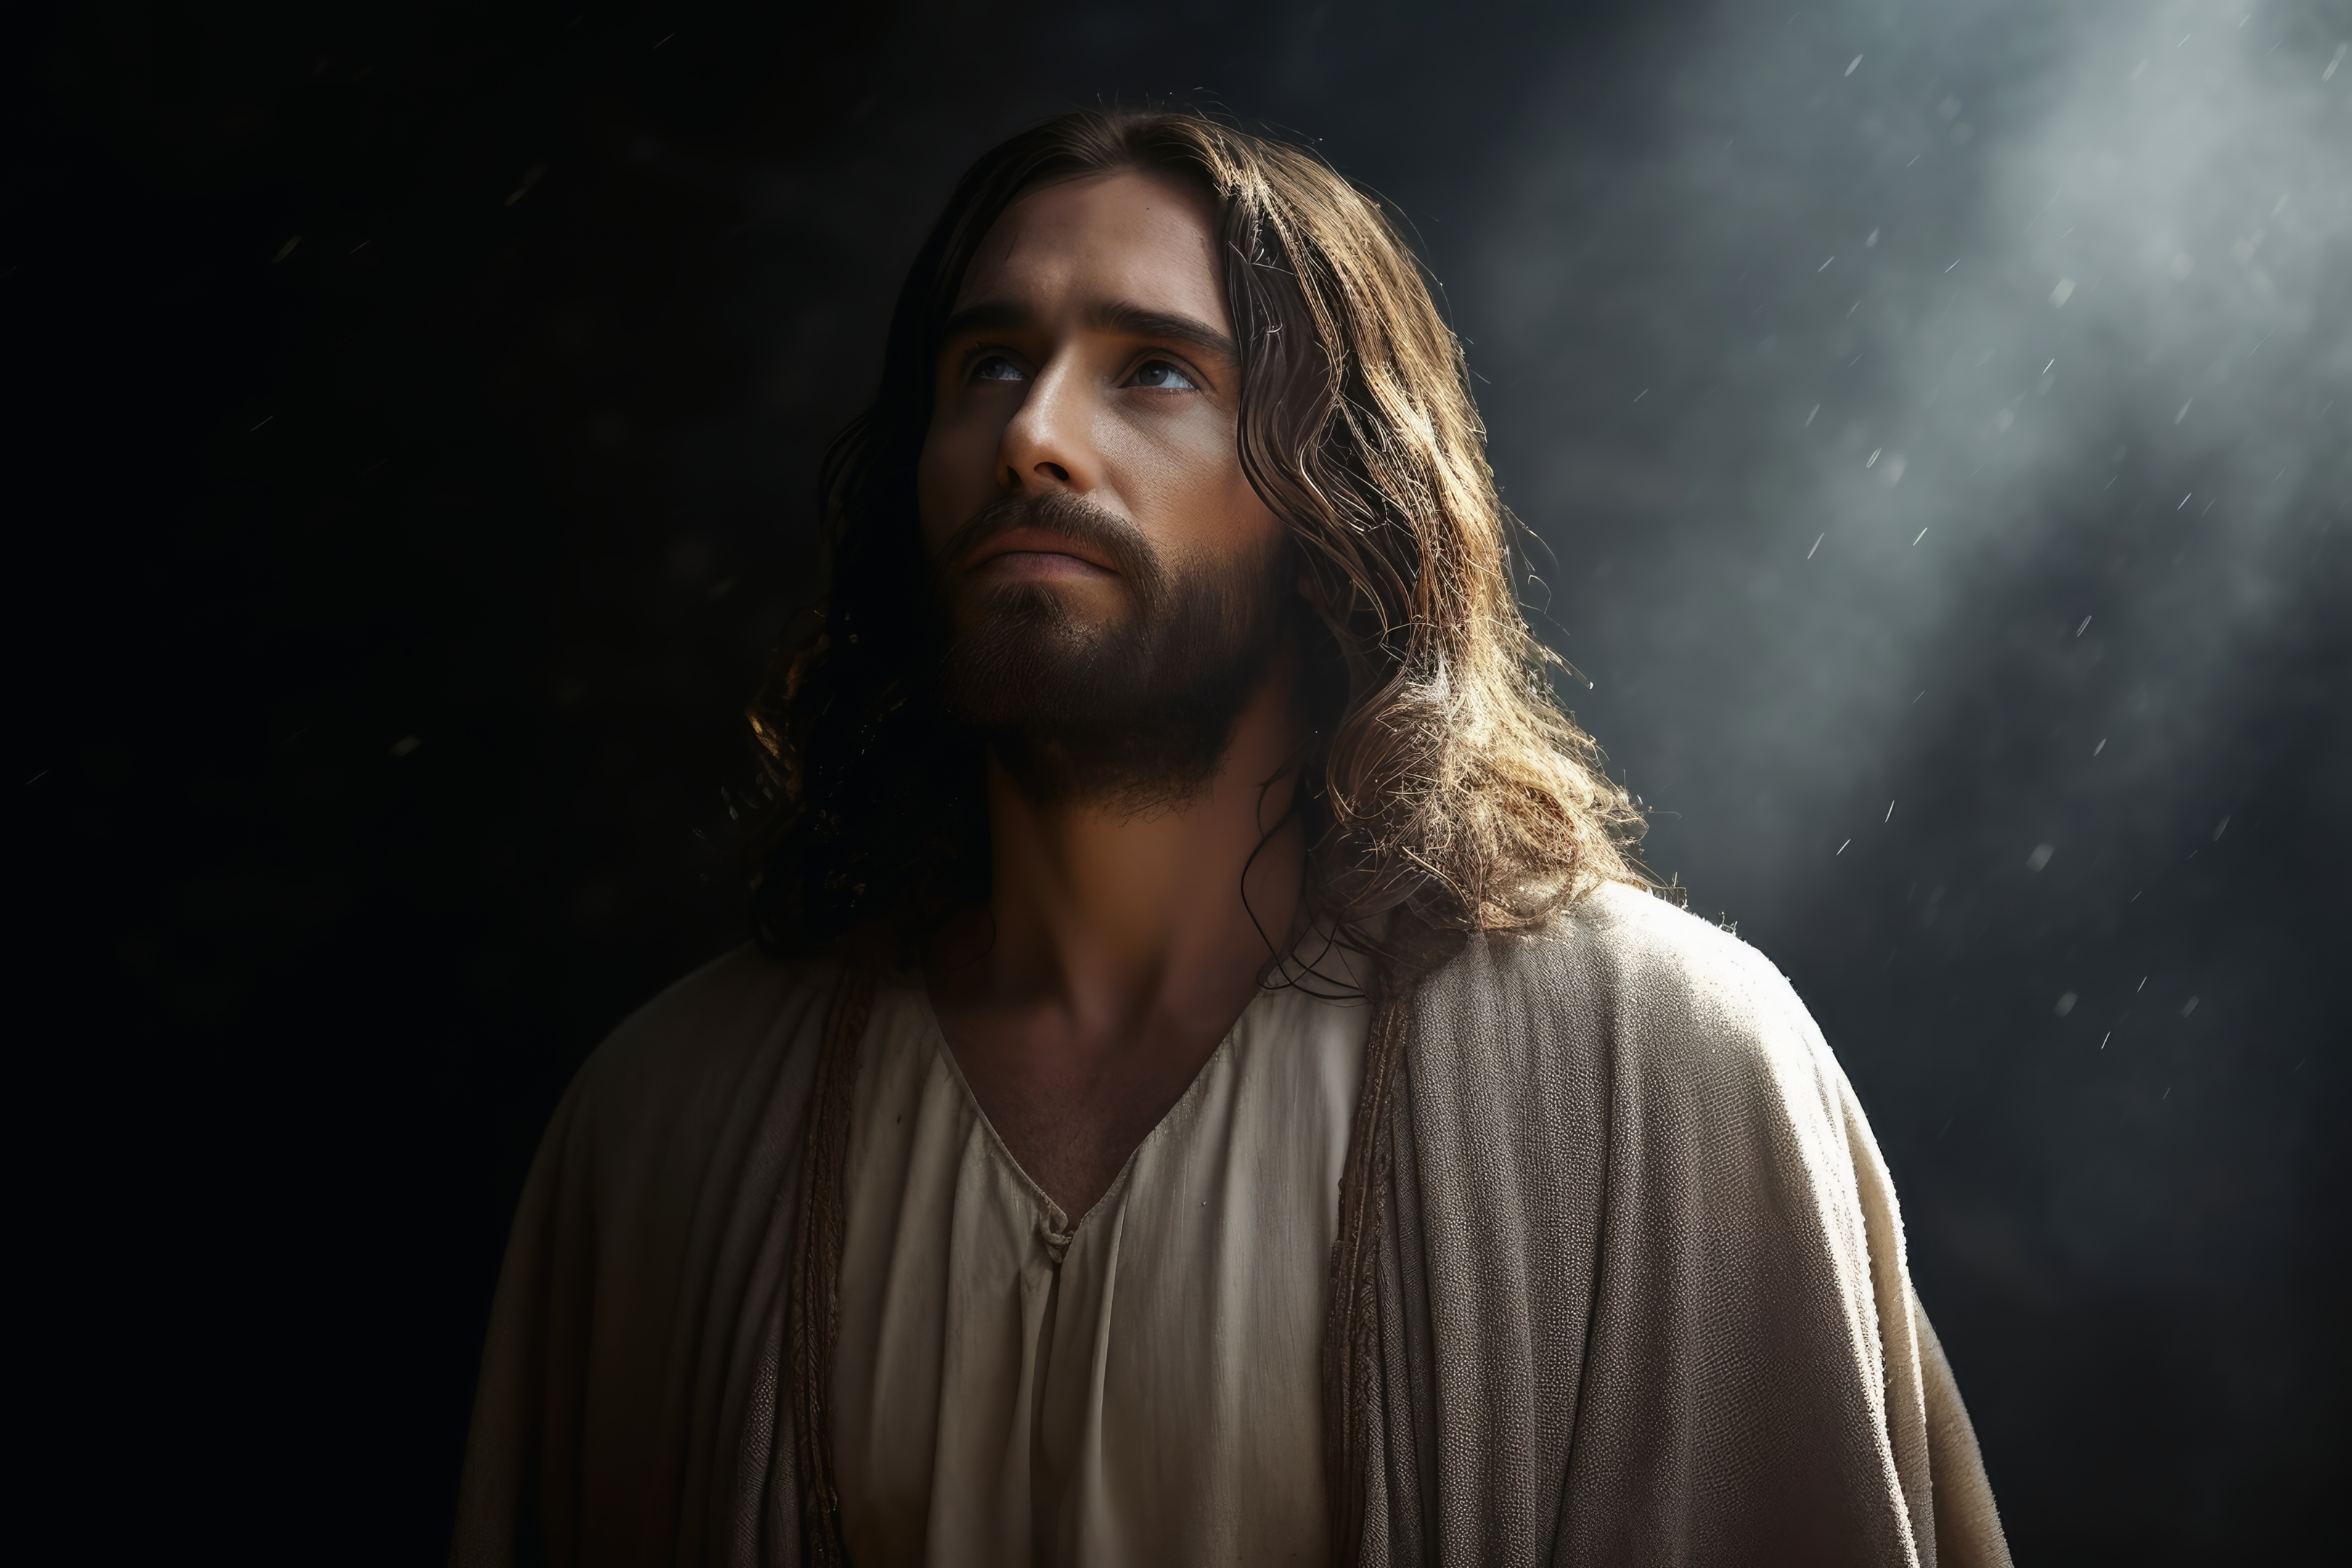 An image depicting Jesus Christ, representing the justice of God in the New Testament.